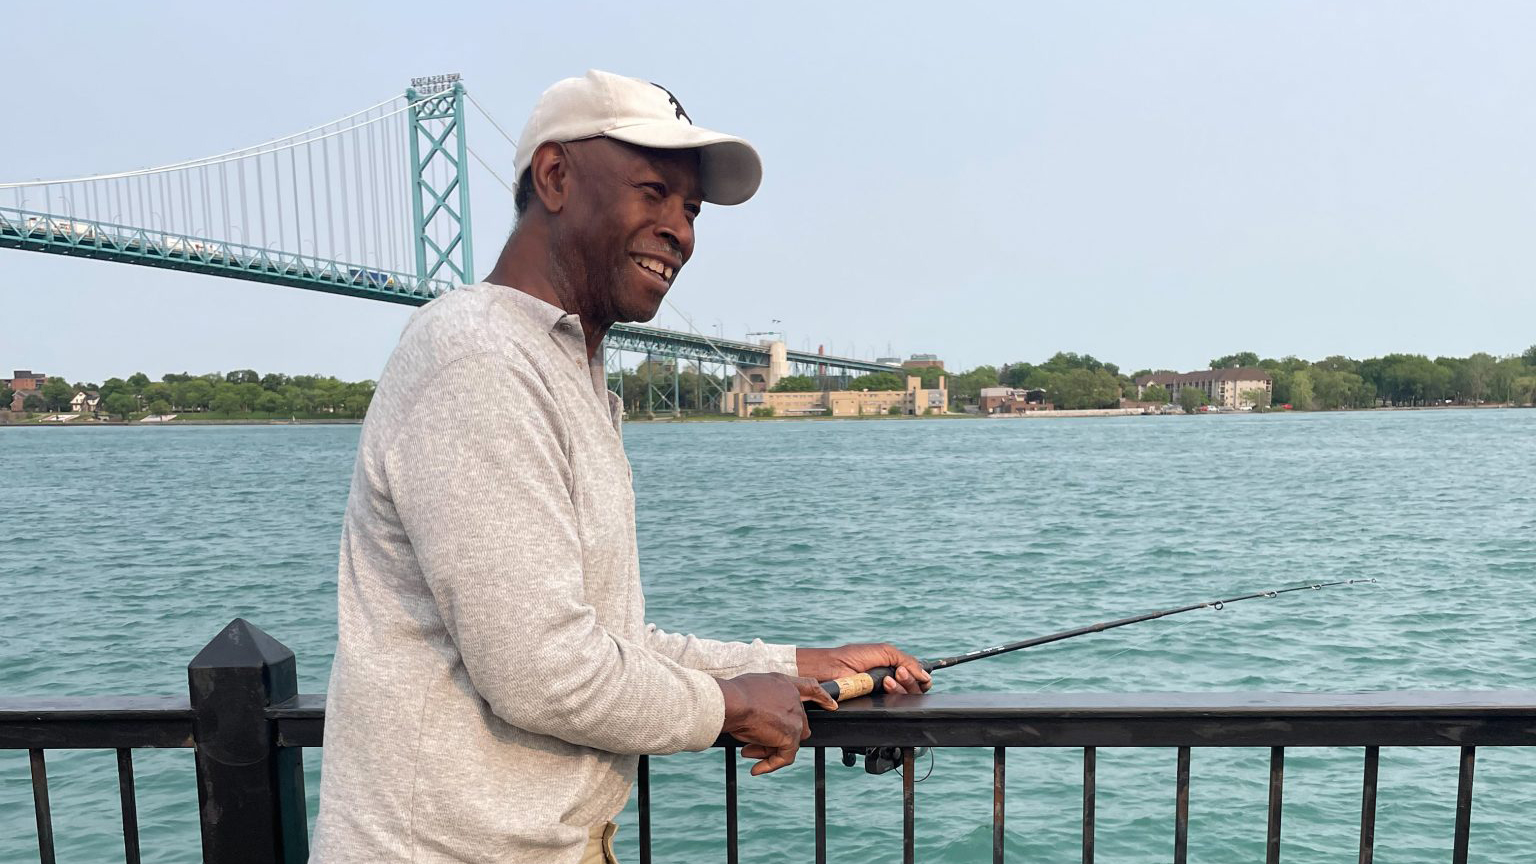 CuriosiD: How do you catch fish in the Detroit River? And are they